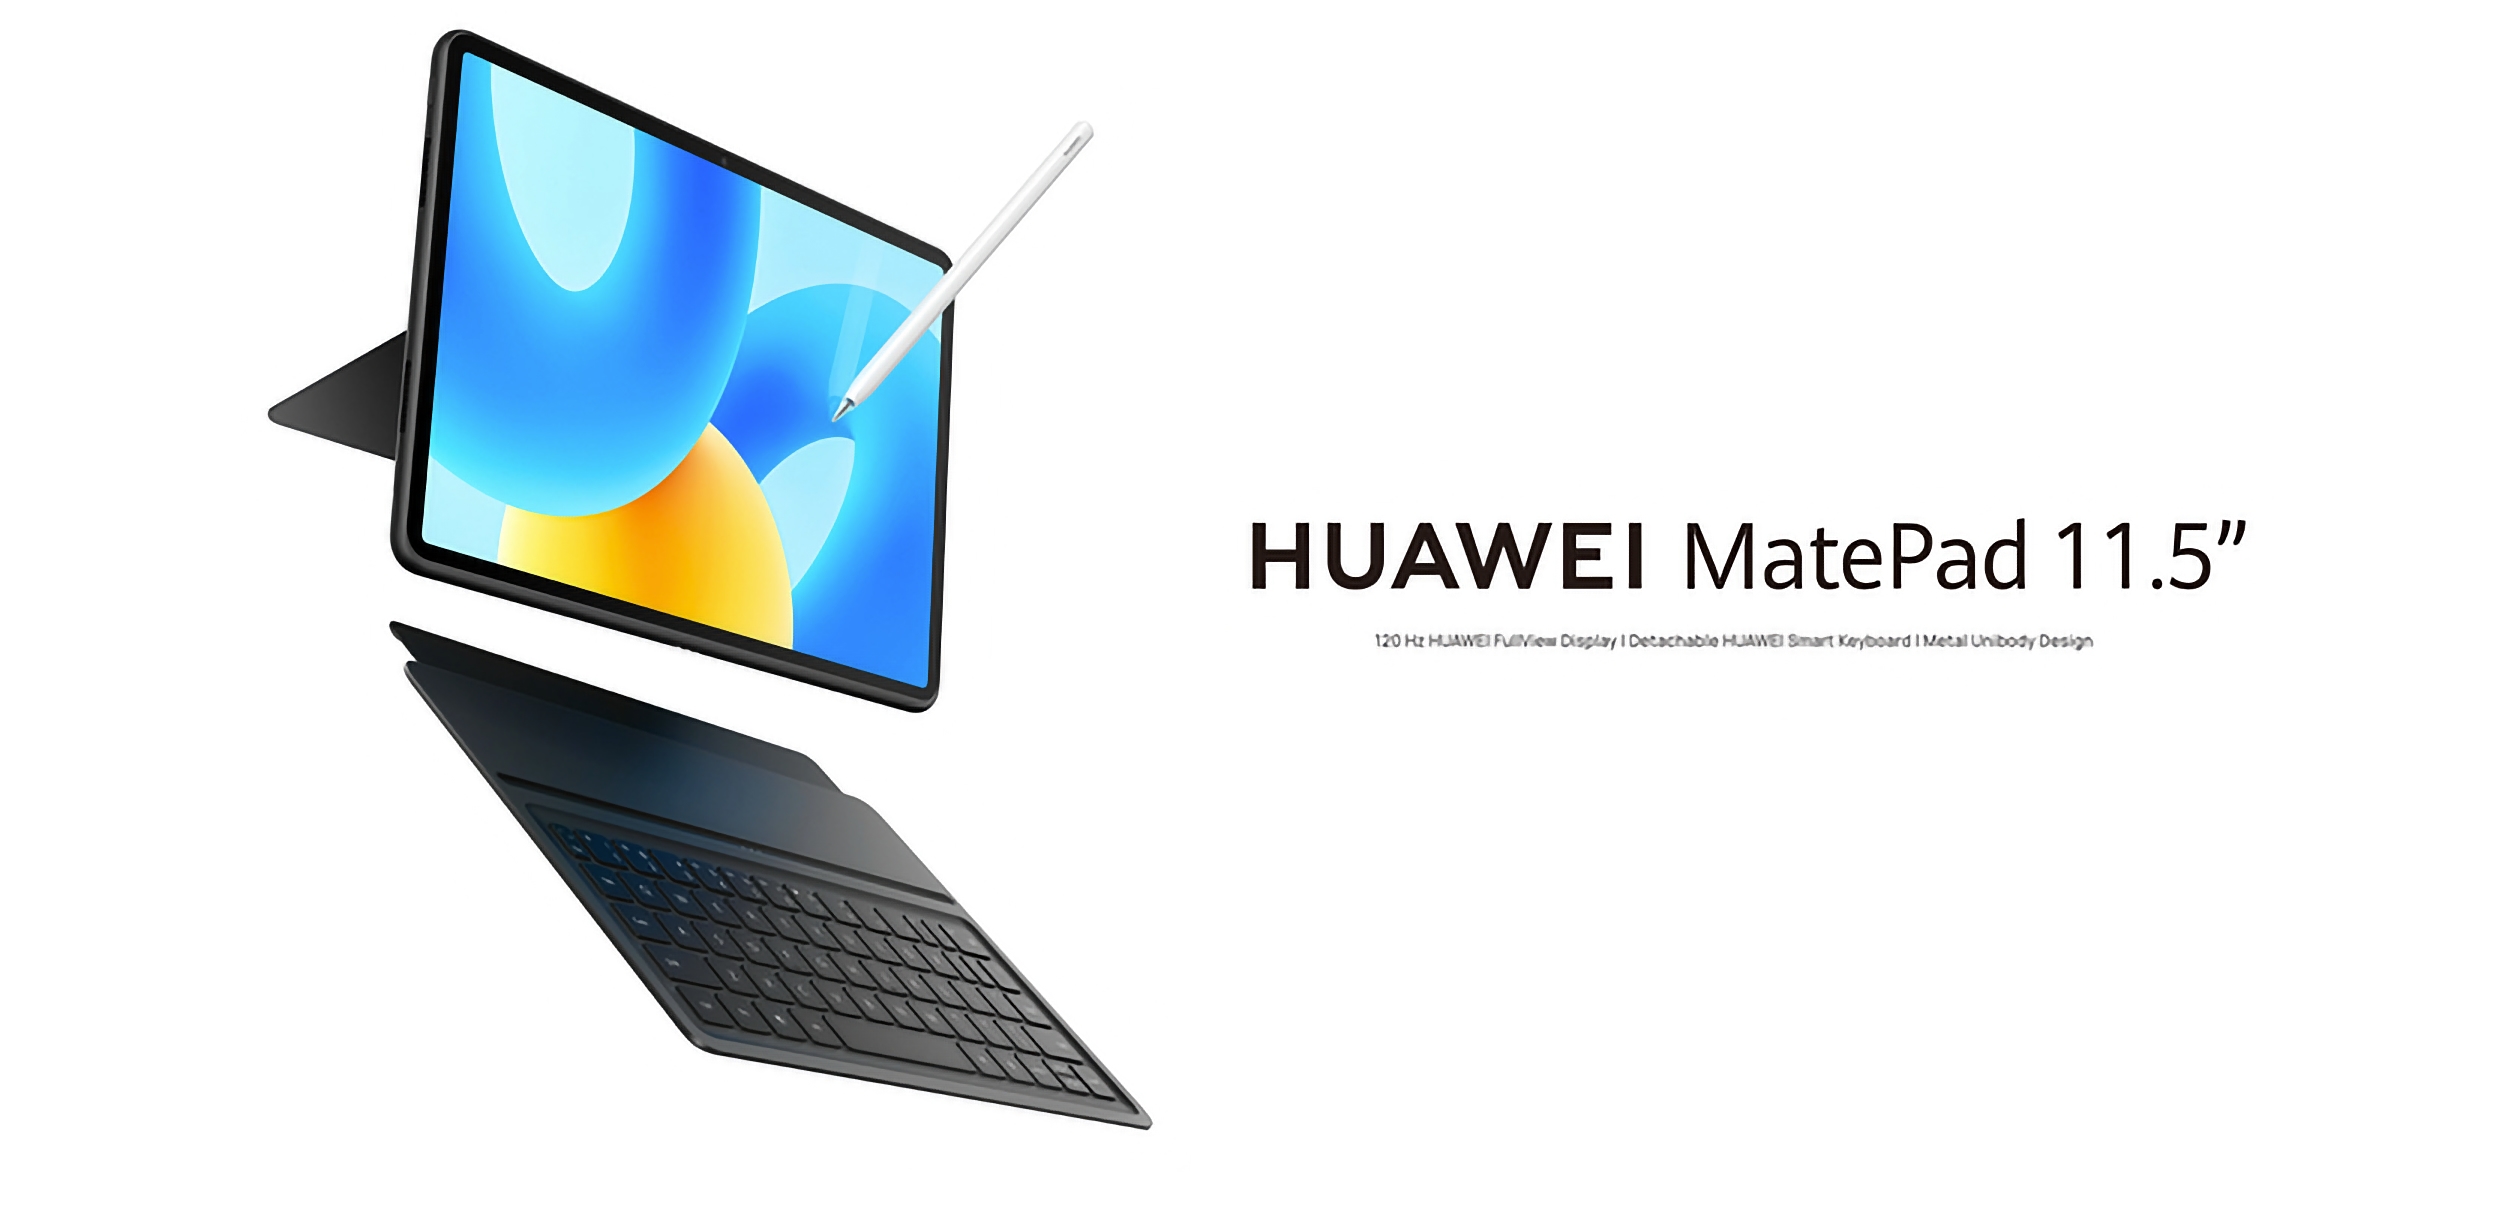 Huawei MatePad 11.5 with 120Hz display and Snapdragon 7 Gen 1 chip started selling in Europe